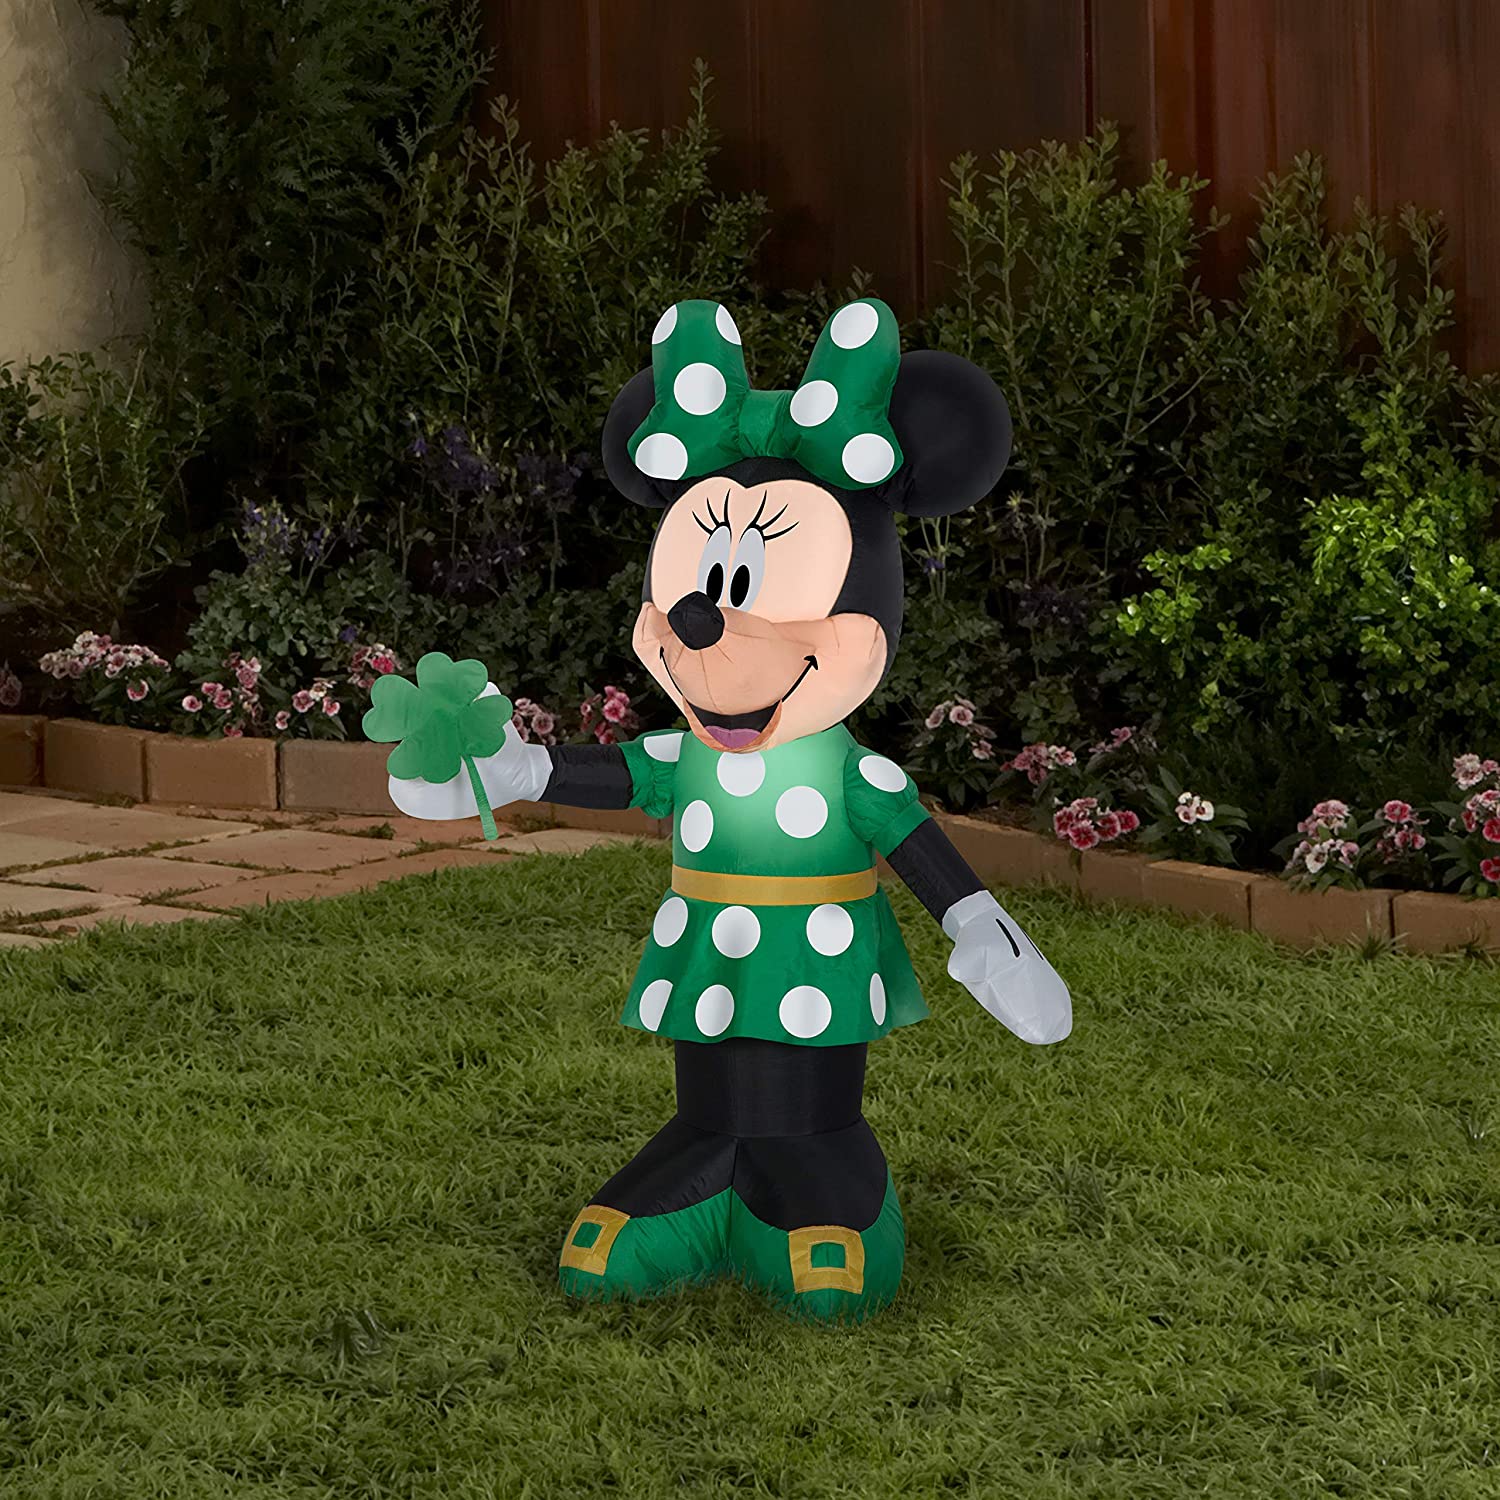 Gemmy Airblown Inflatable St. Patrick's Day Minnie Mouse, 3.5 ft Tall, Green, Patio, Lawn & Garden